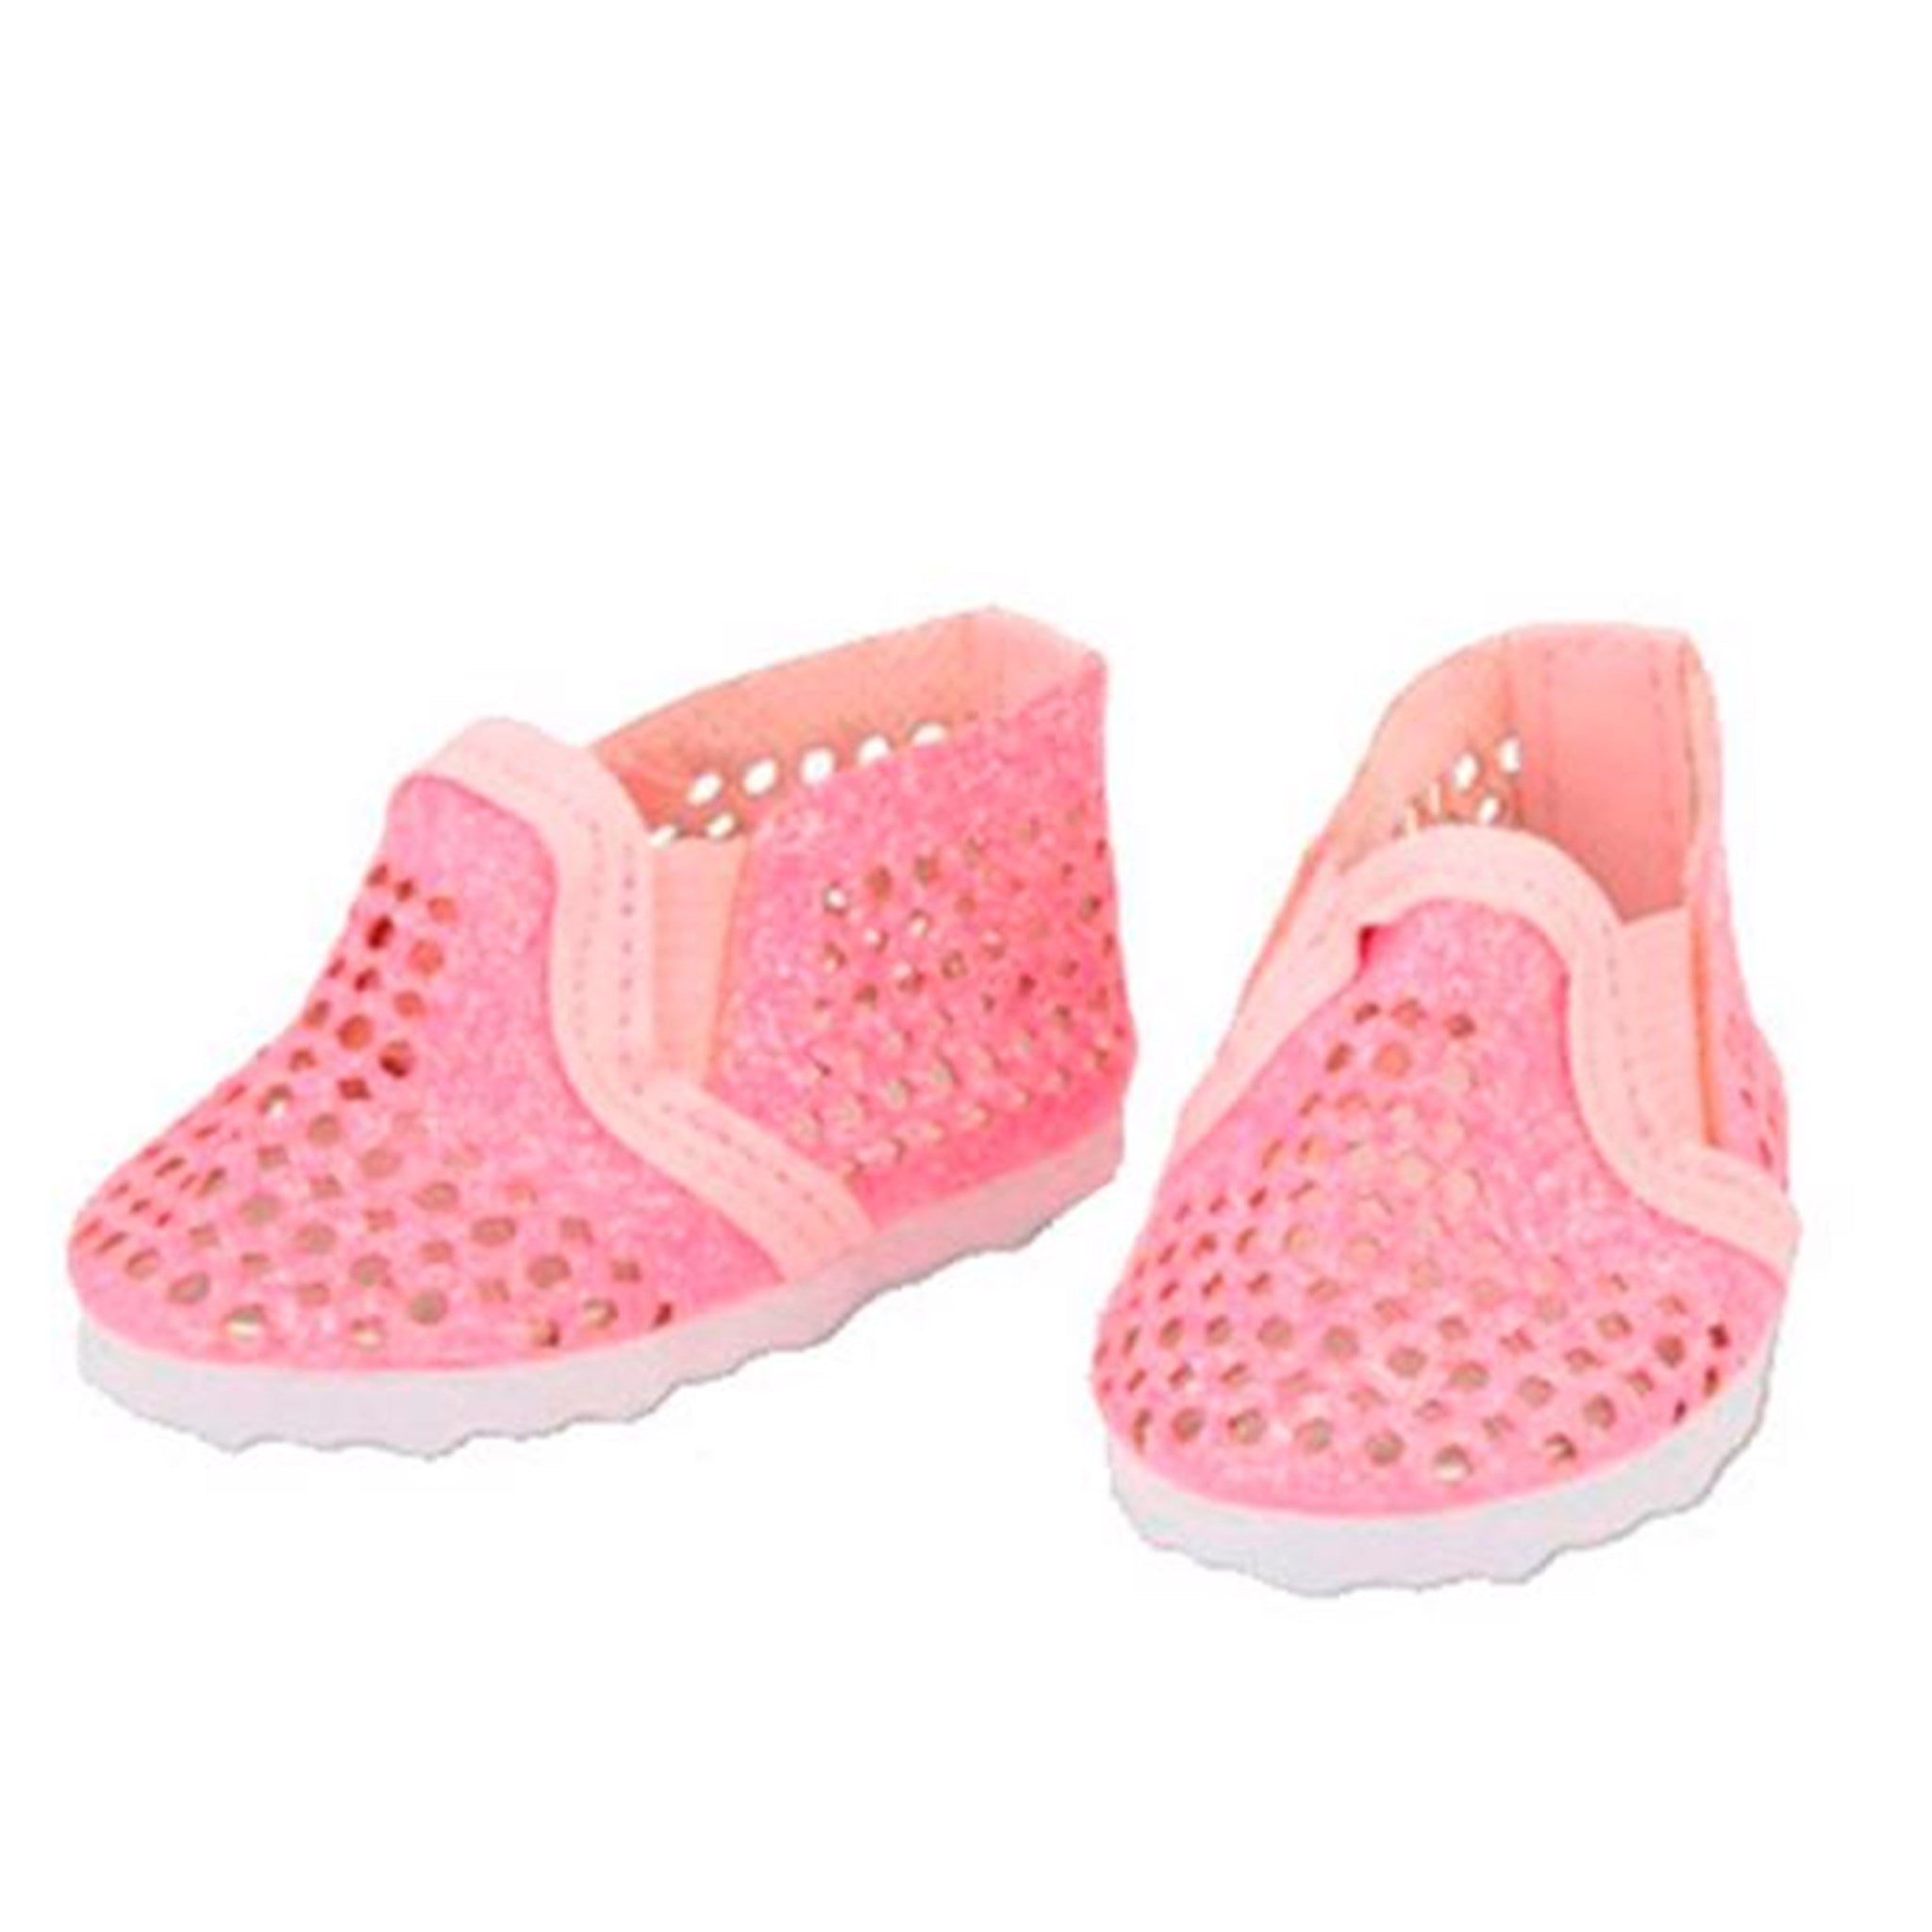 Our Generation Doll Shoes - Slip-On Shoes Pink